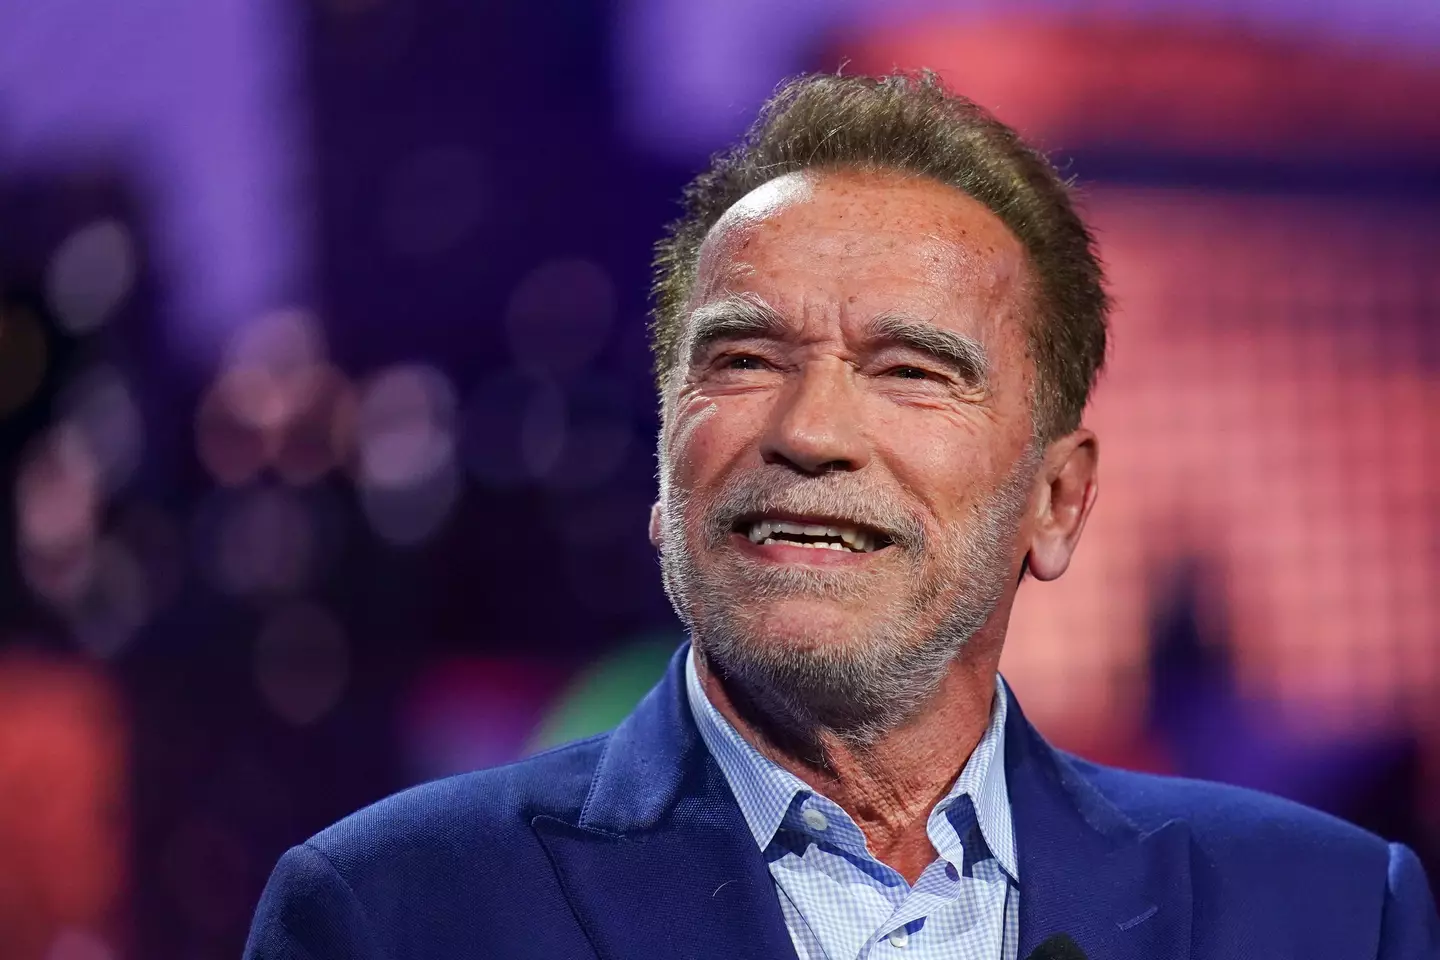 Arnold Schwarzenegger shared some insight into his diet as a 80 percent vegan.